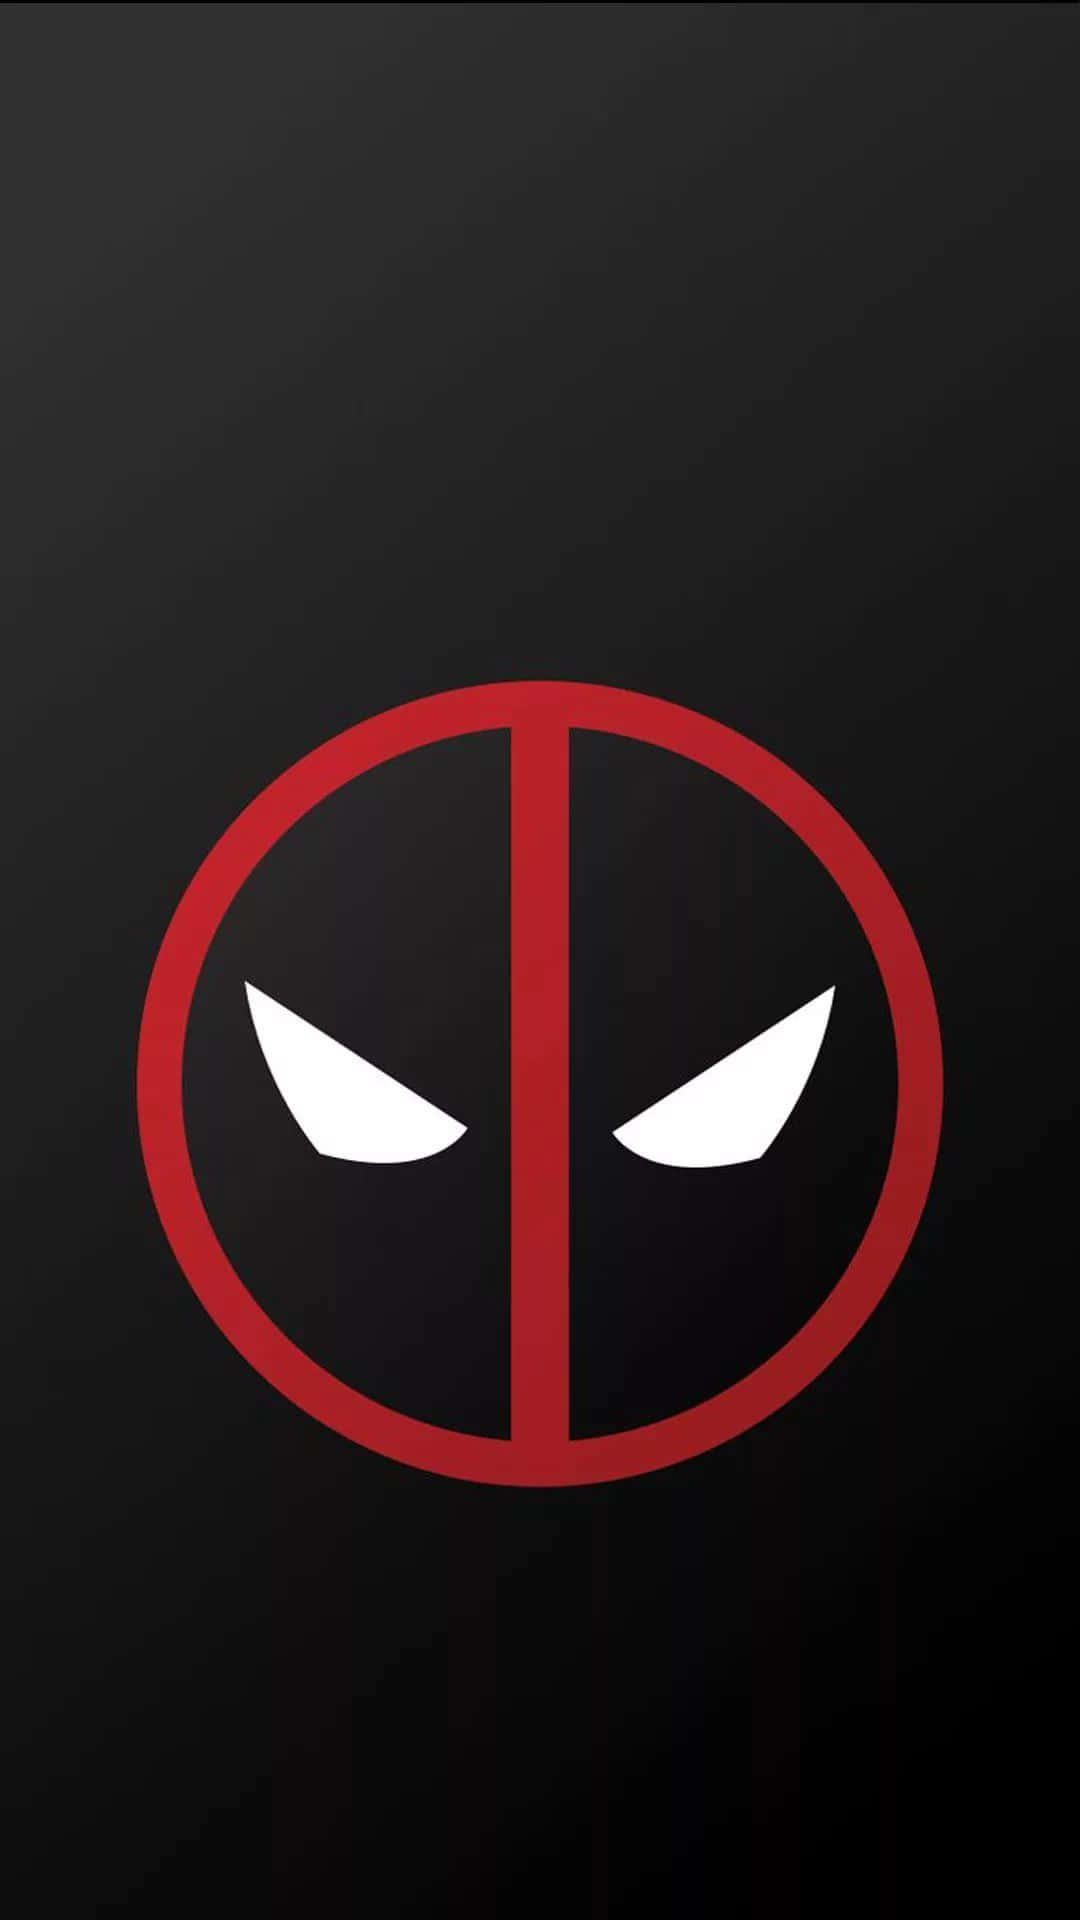 Up your game with this Deadpool-inspired iPhone! Wallpaper